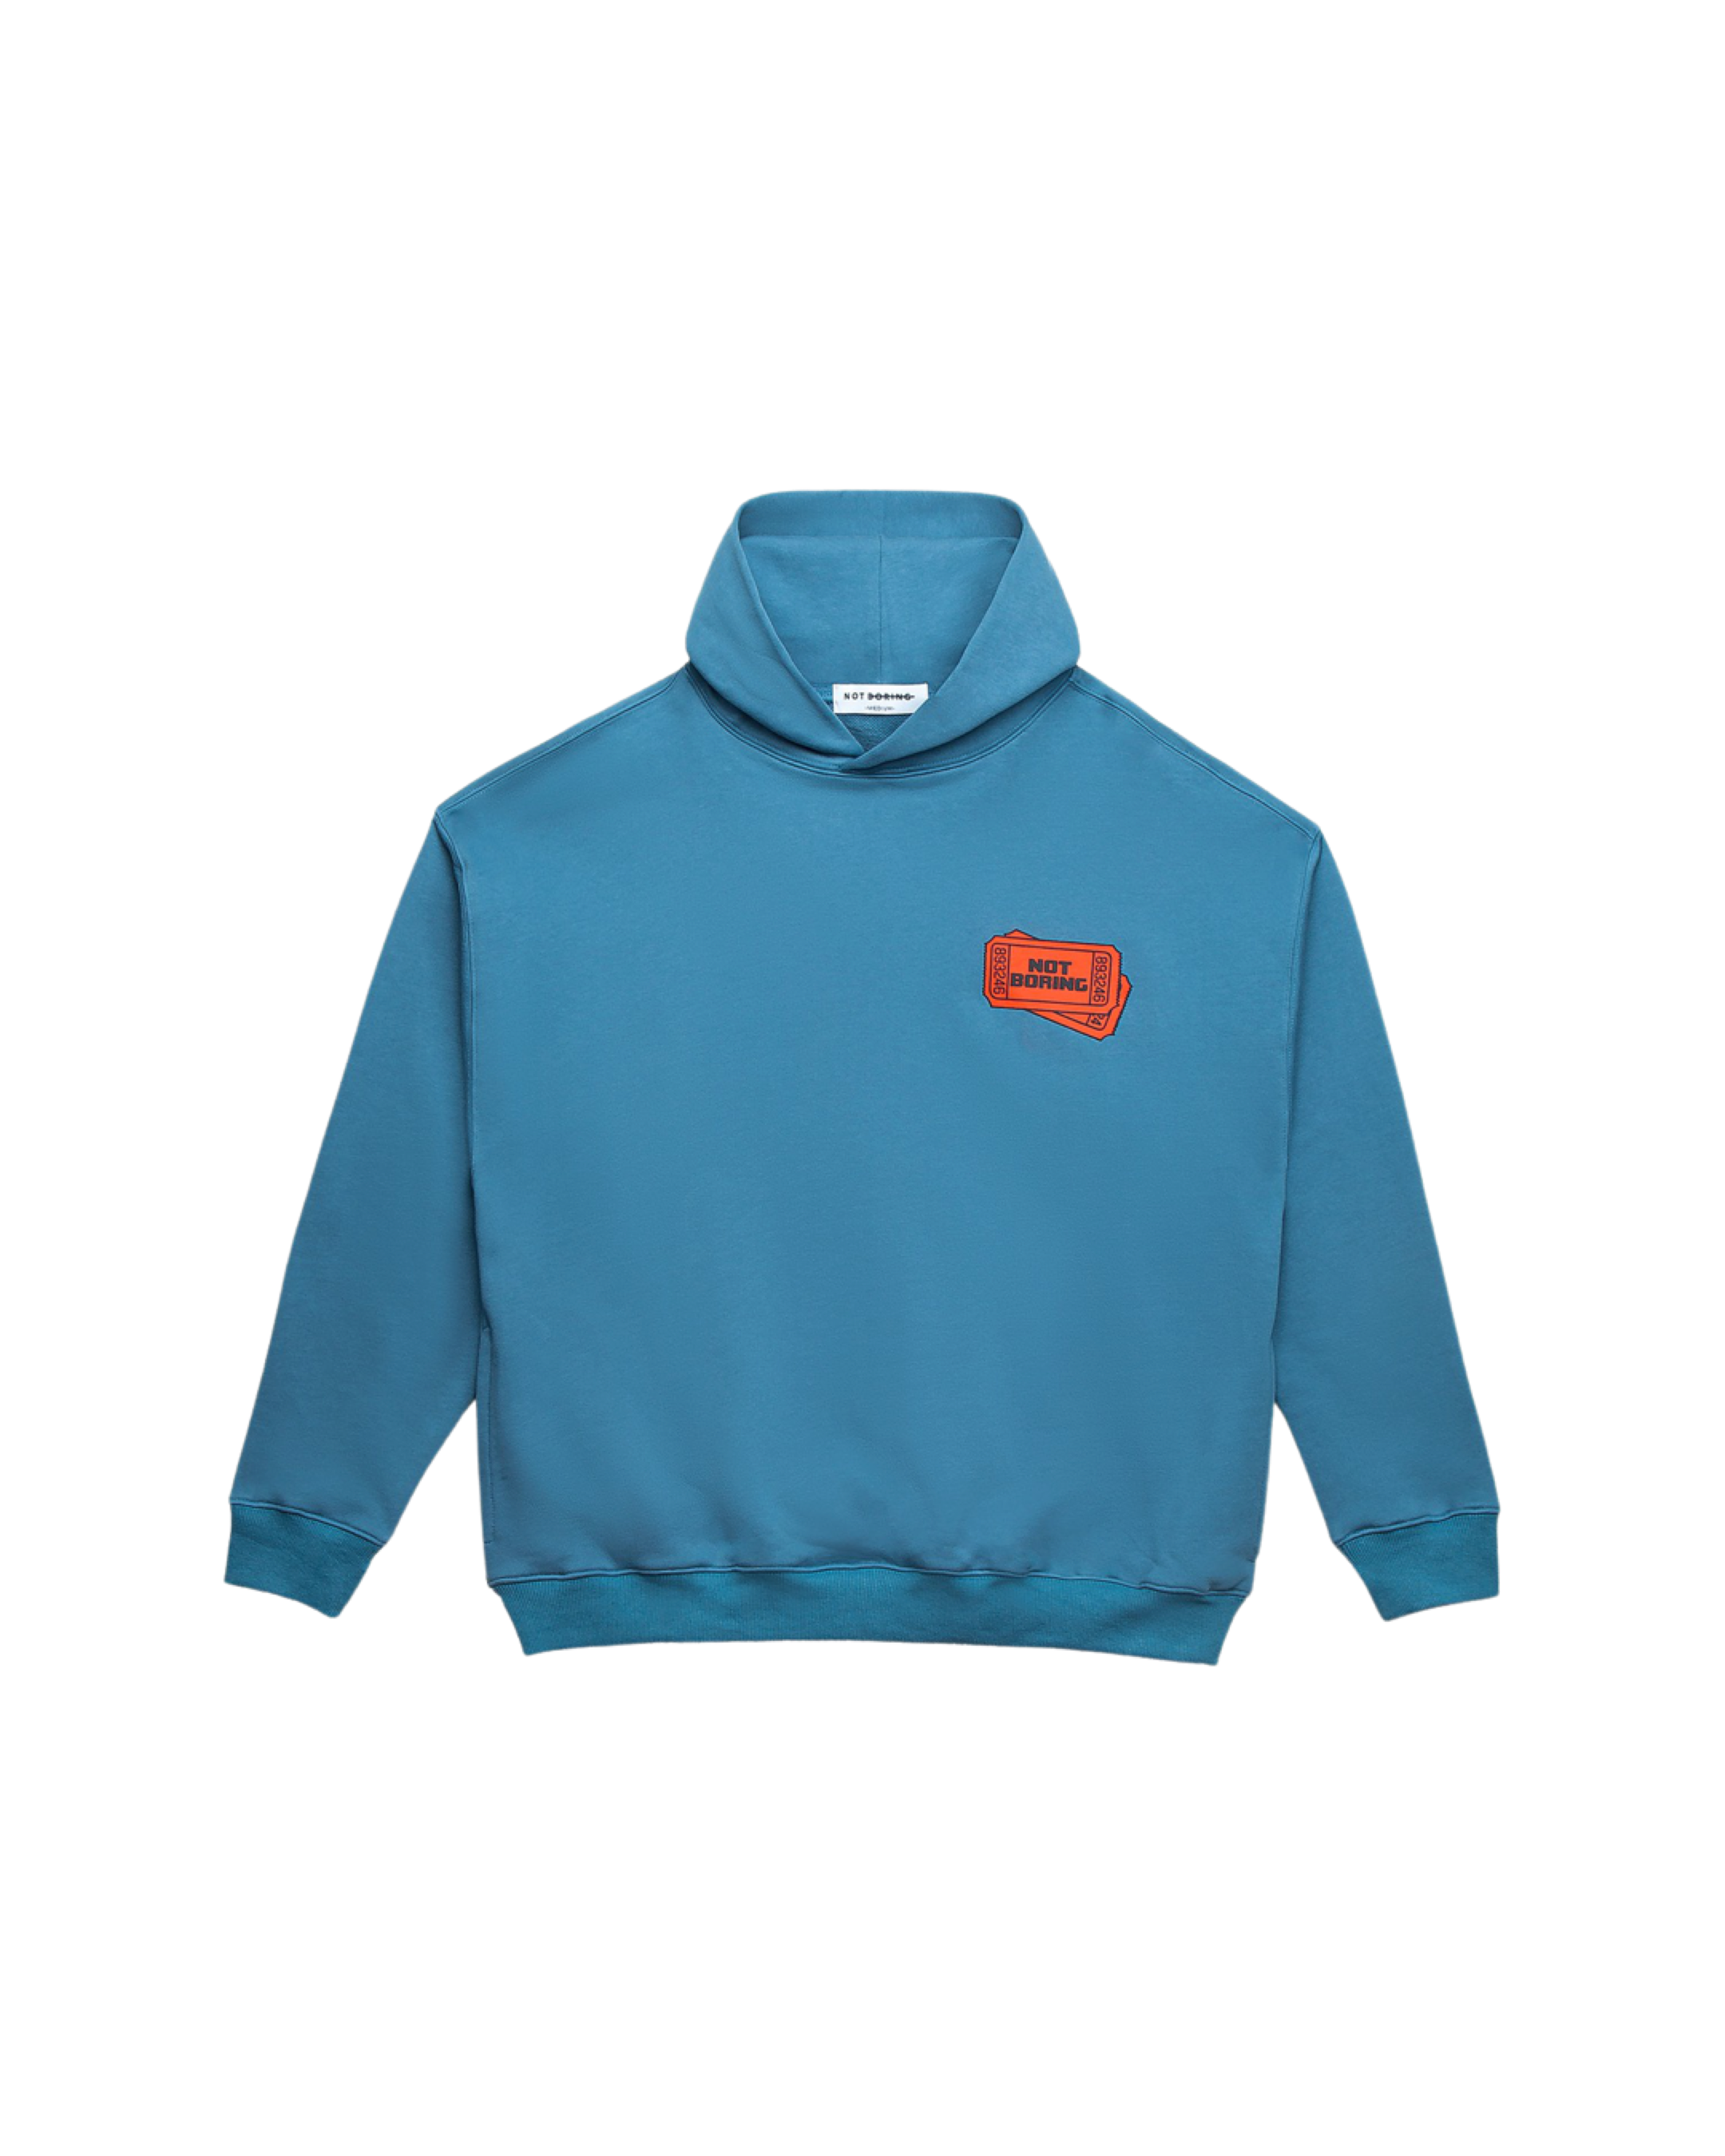 Social Expectations Hoodie